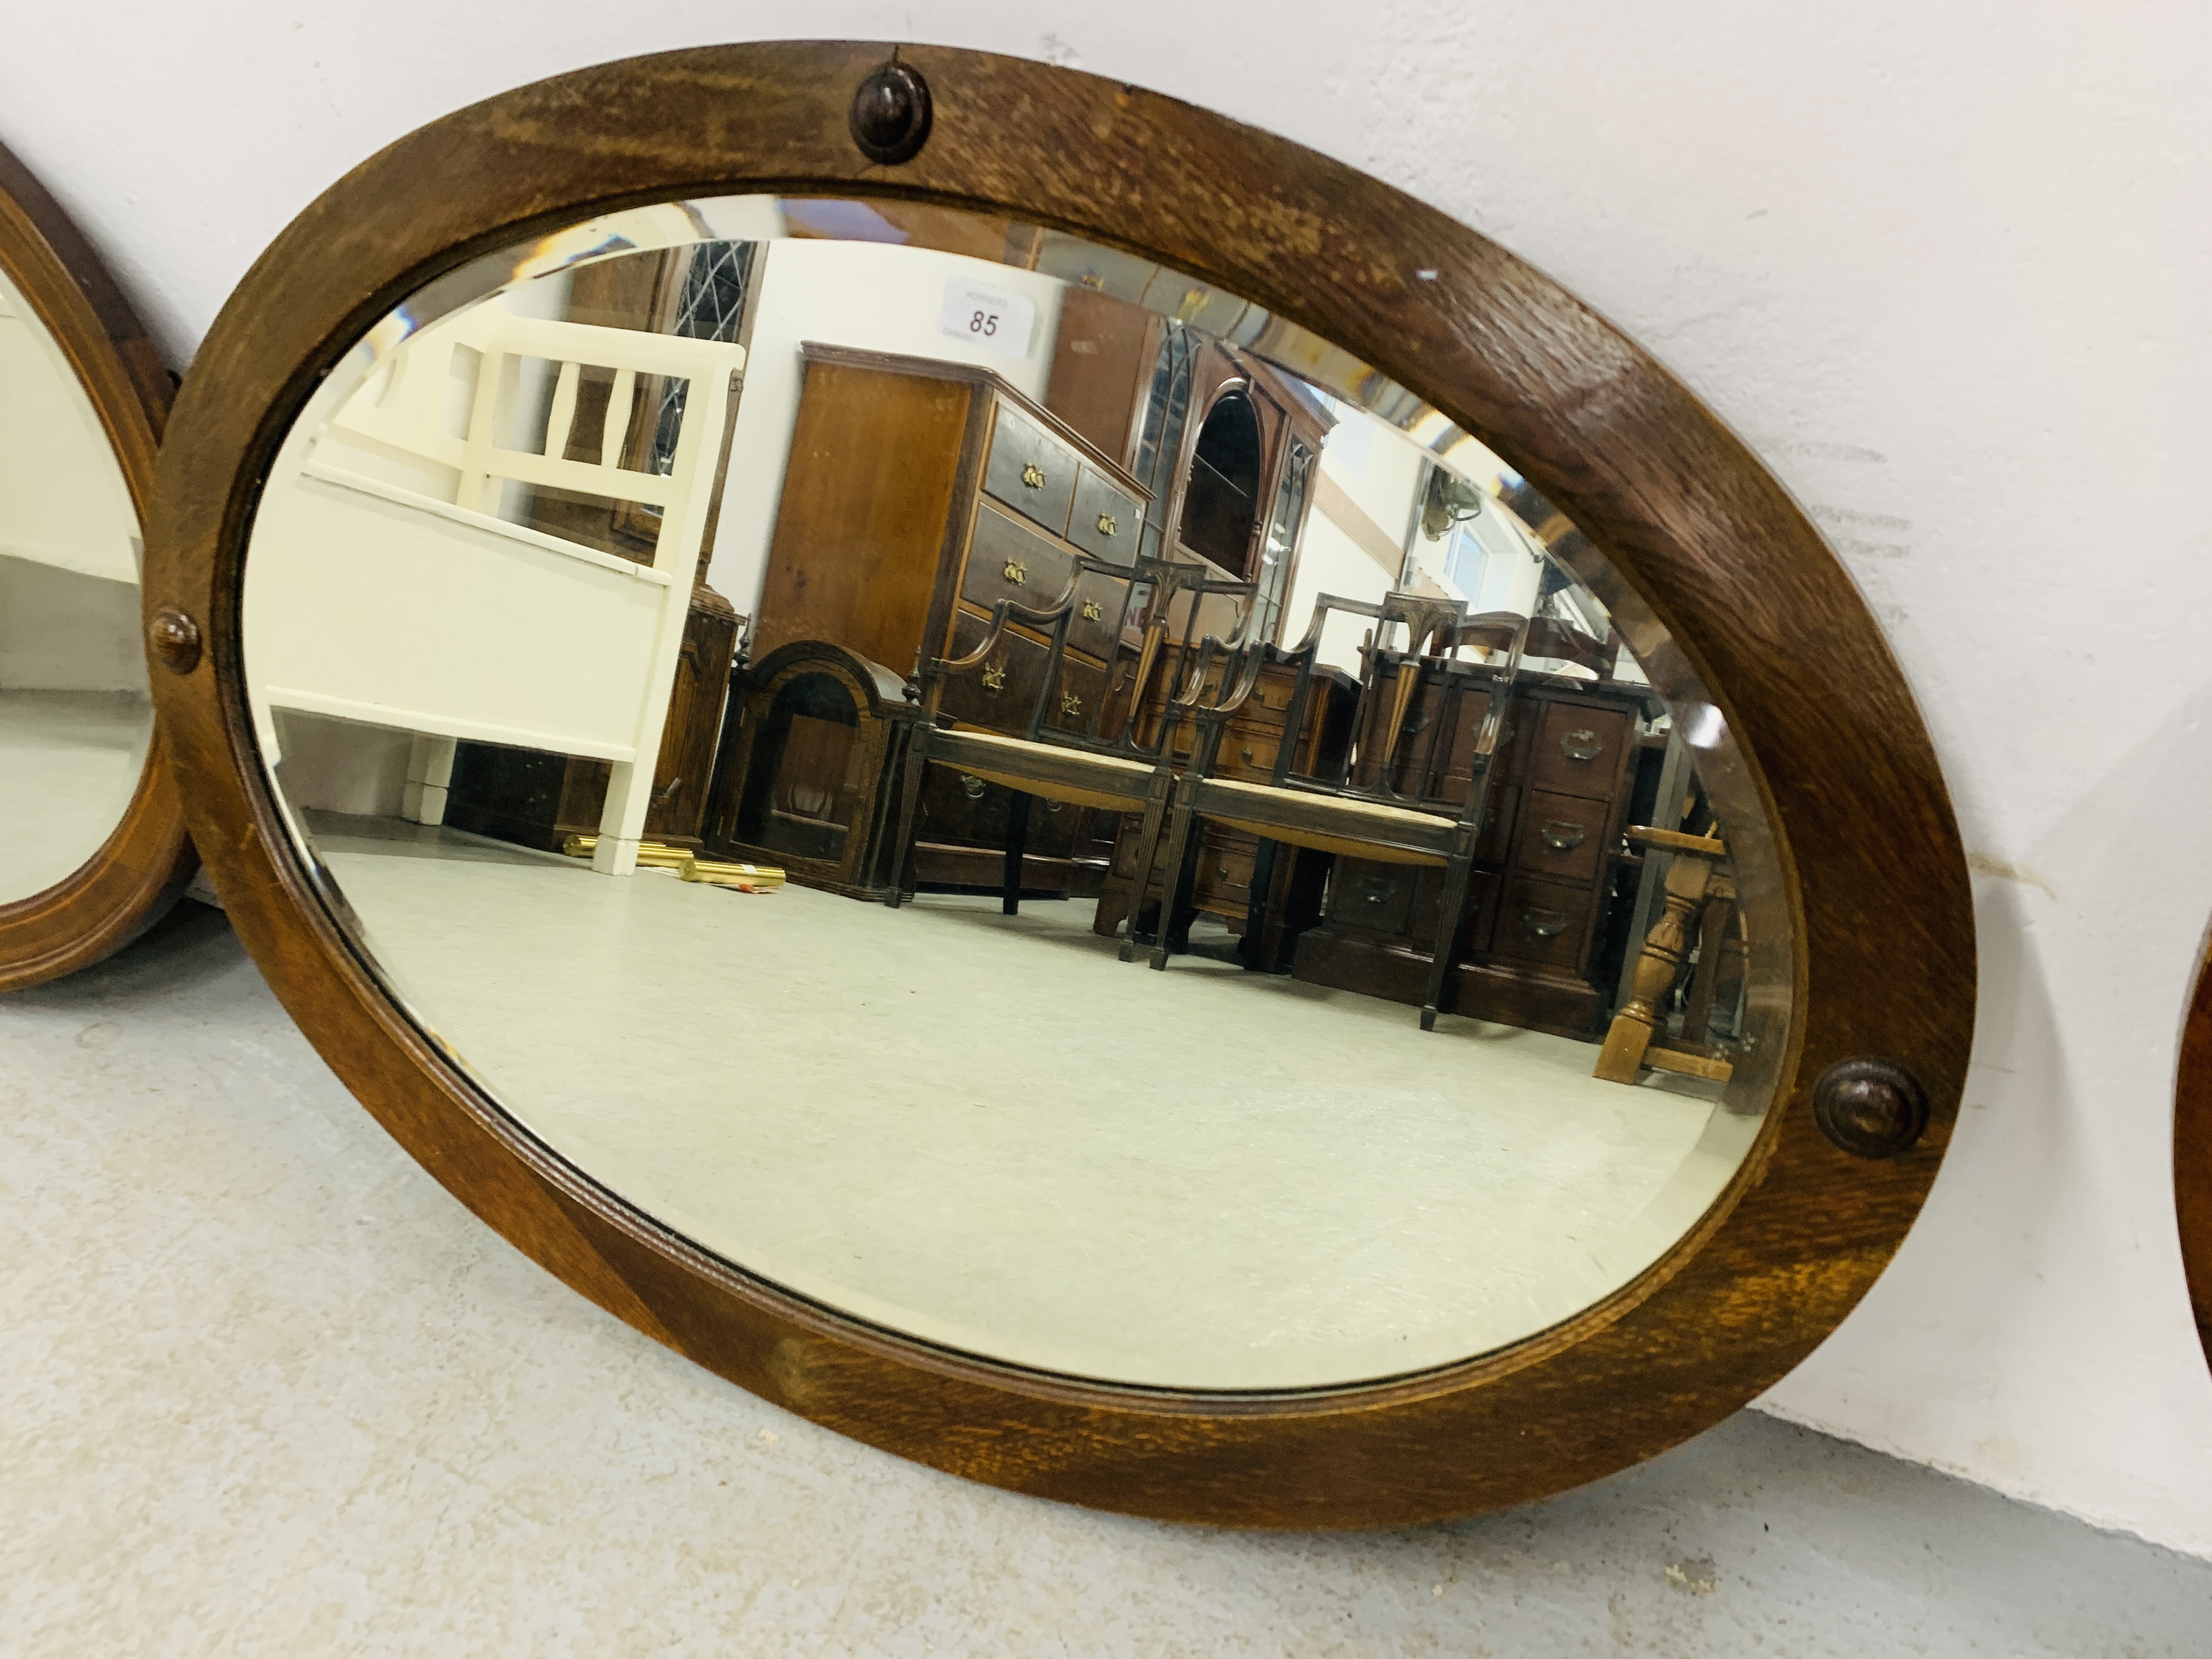 2 X VINTAGE MAHOGANY FRAMED OVAL BEVEL PLATE WALL MIRRORS ALONG WITH AN OVAL OAK FRAMED BEVEL PLATE - Image 3 of 7